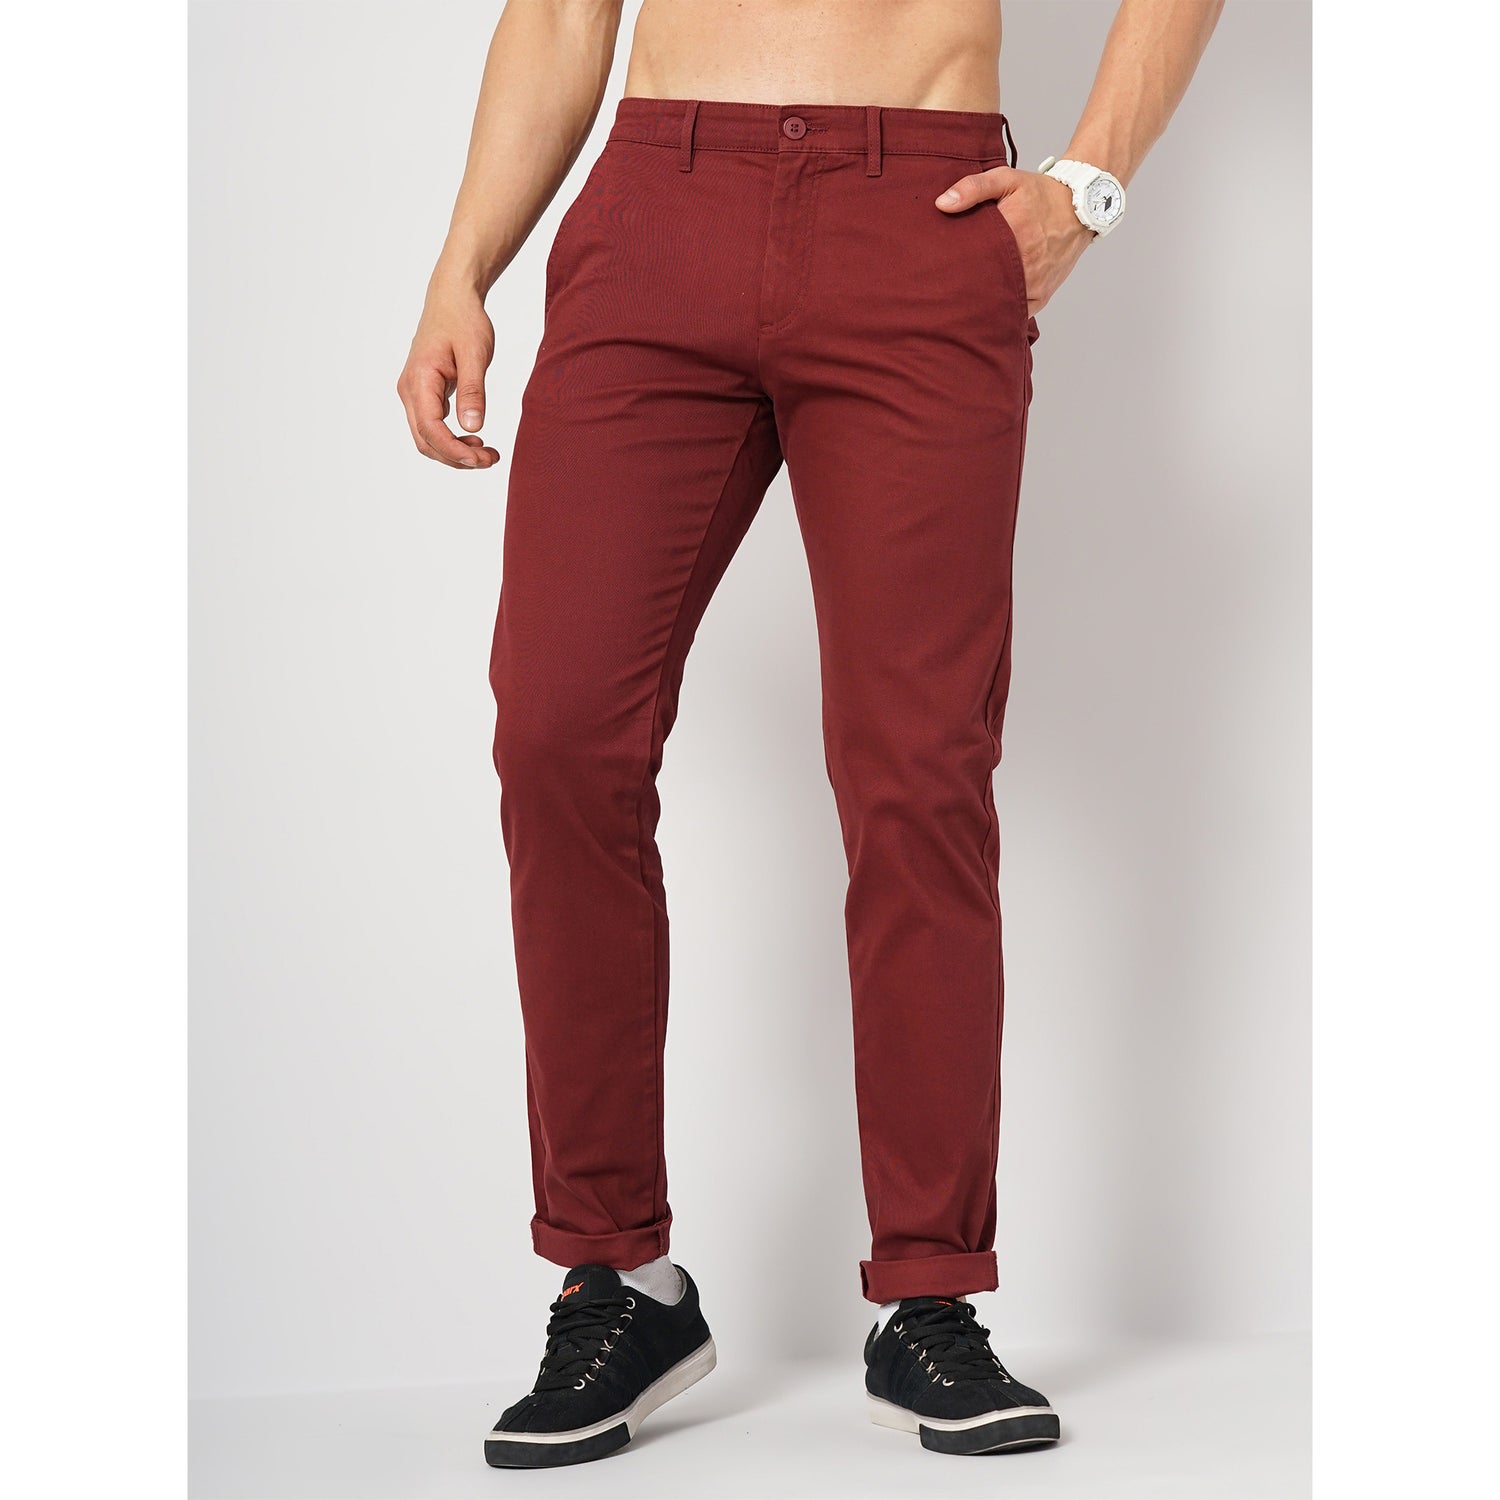 Maroon Solid Cotton Trousers